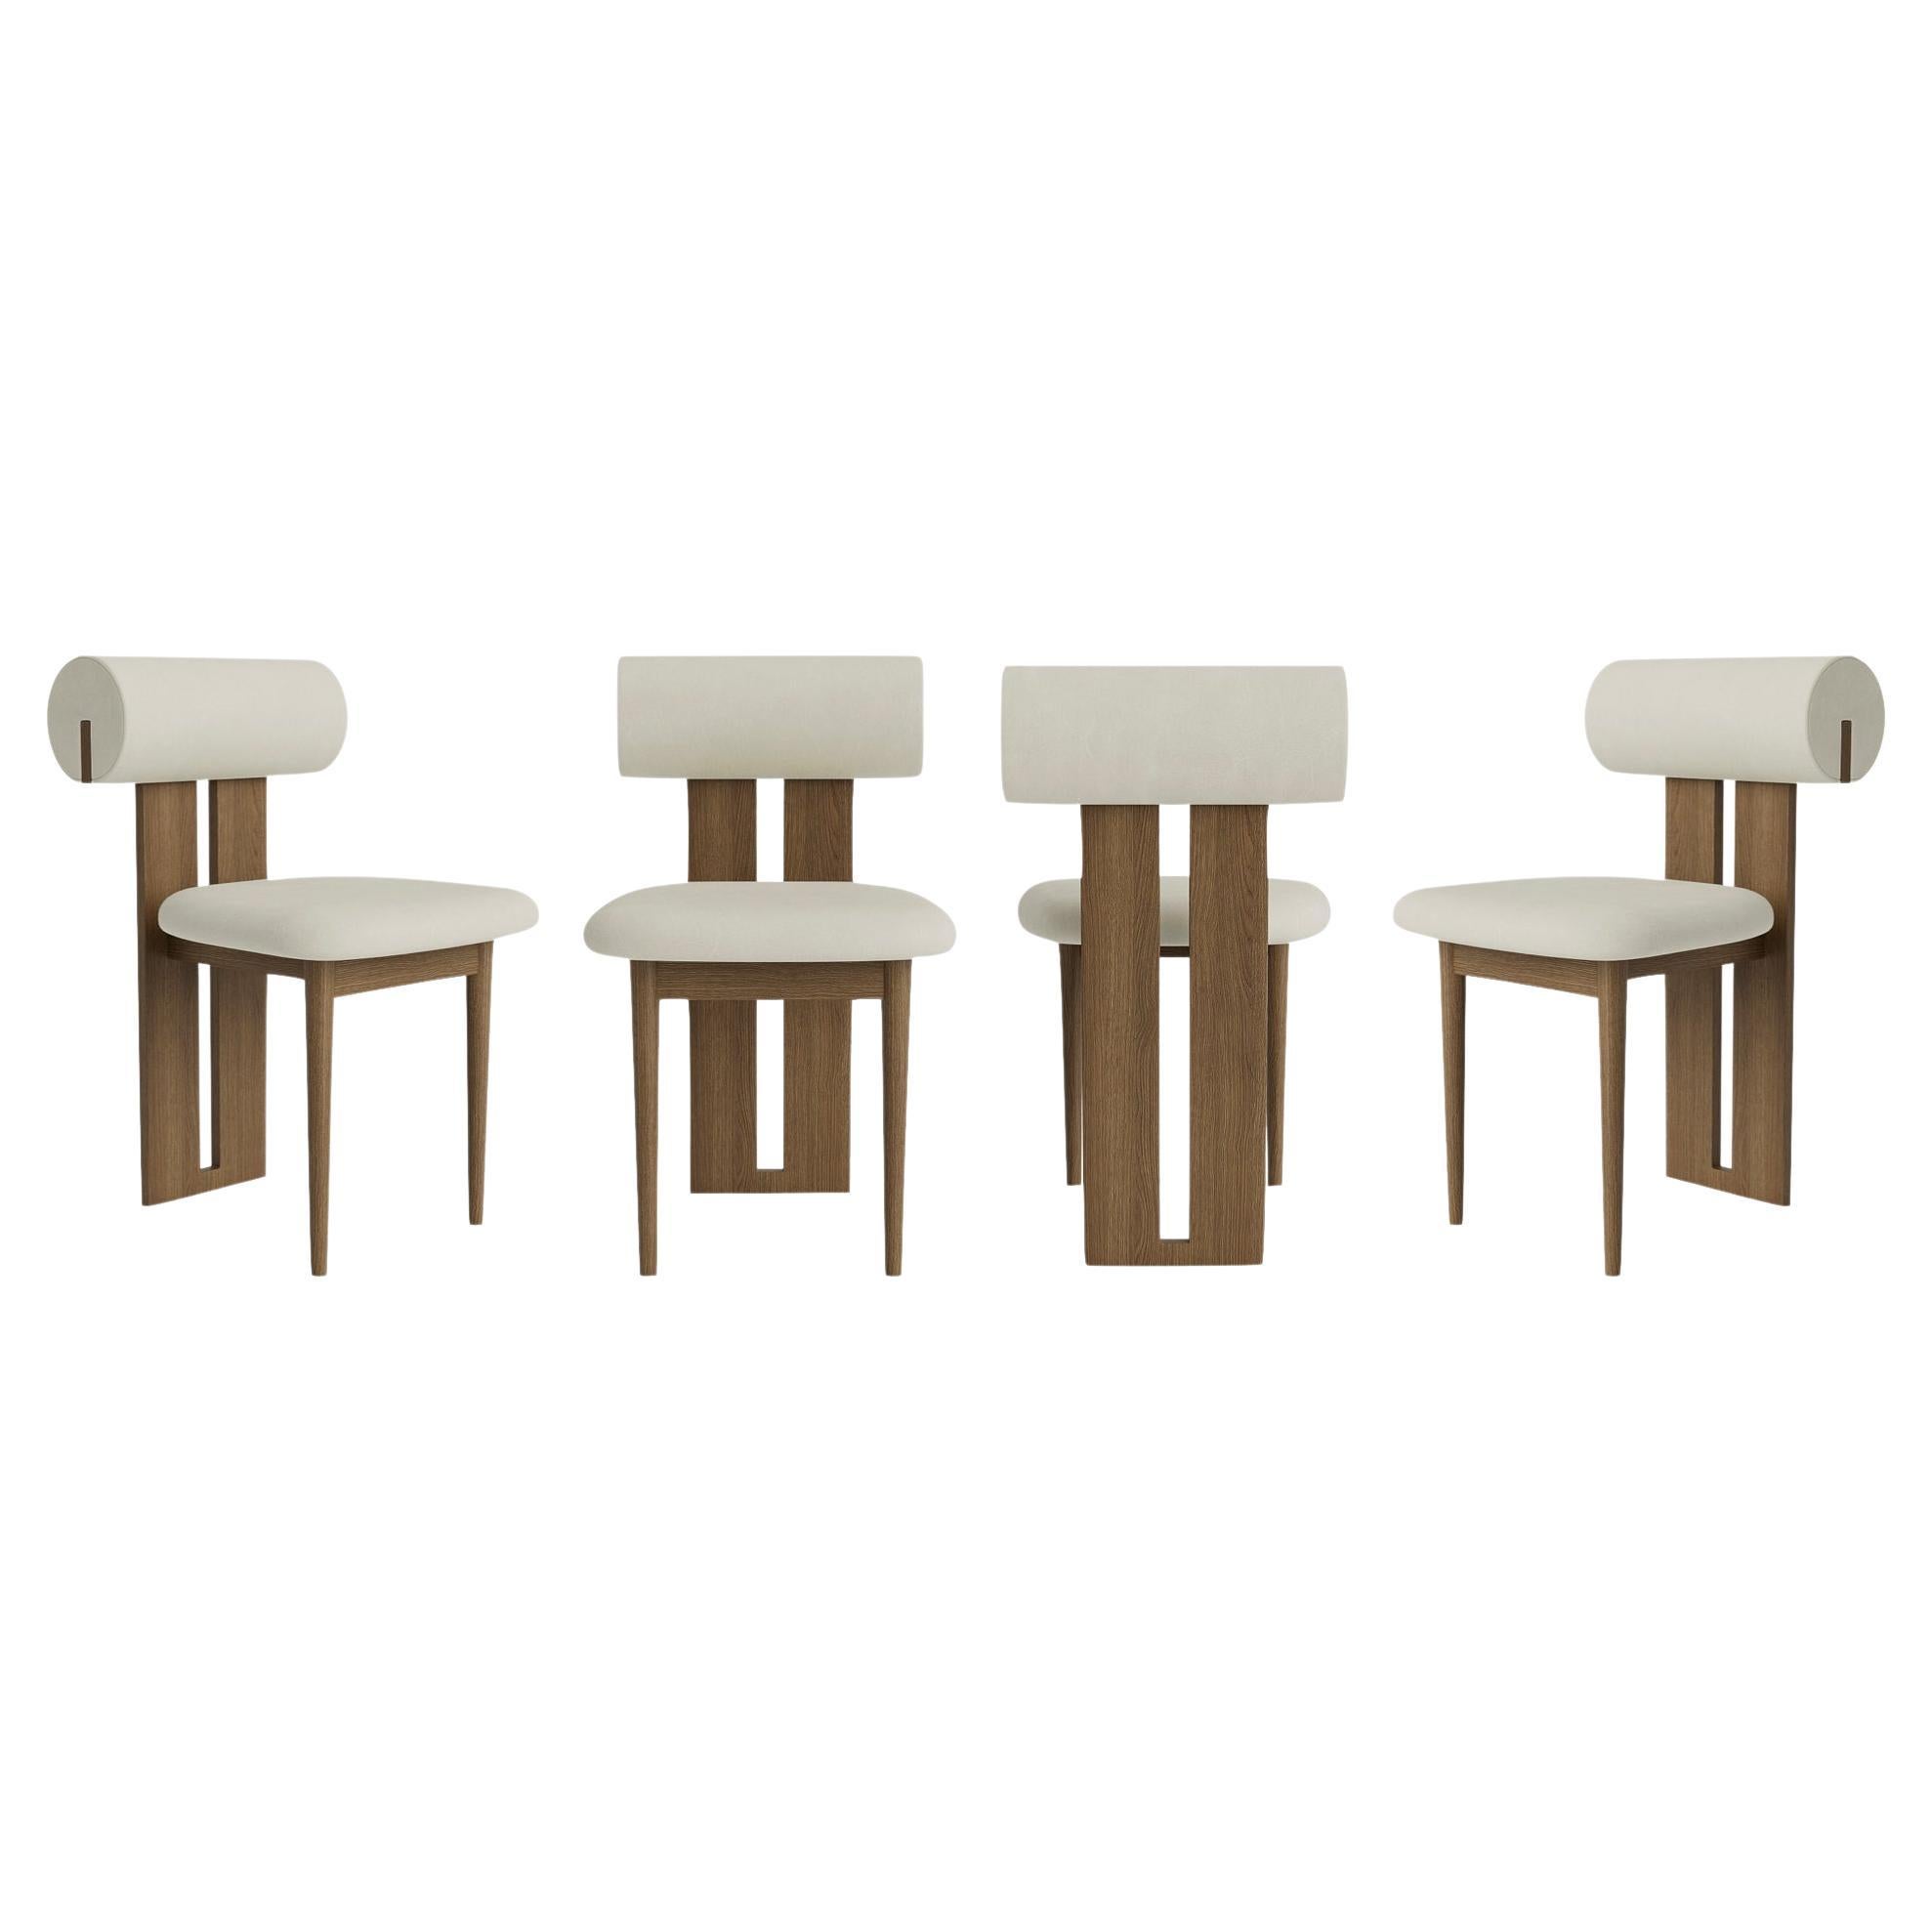 Set of 4 Chairs 'Hippo' by Norr11, Light Smoked Oak, Spectrum Leather, Mineral